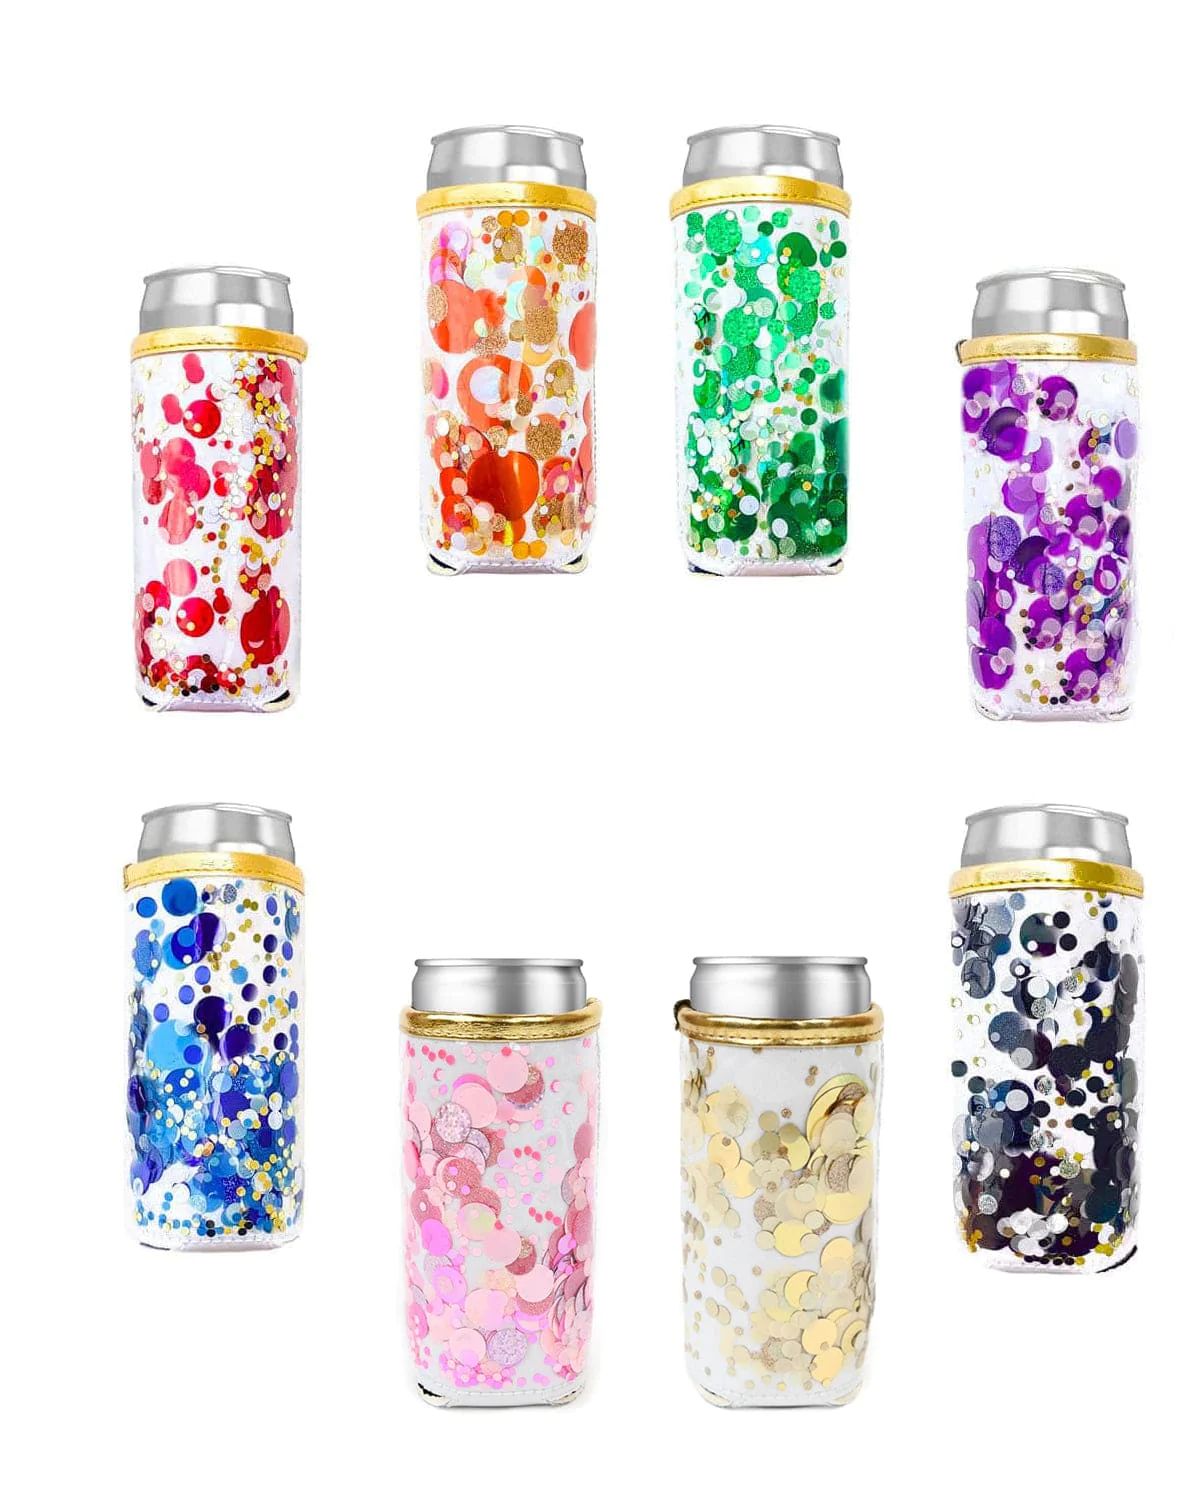 Spirit Squad Confetti Skinny Can Cooler | Packed Party